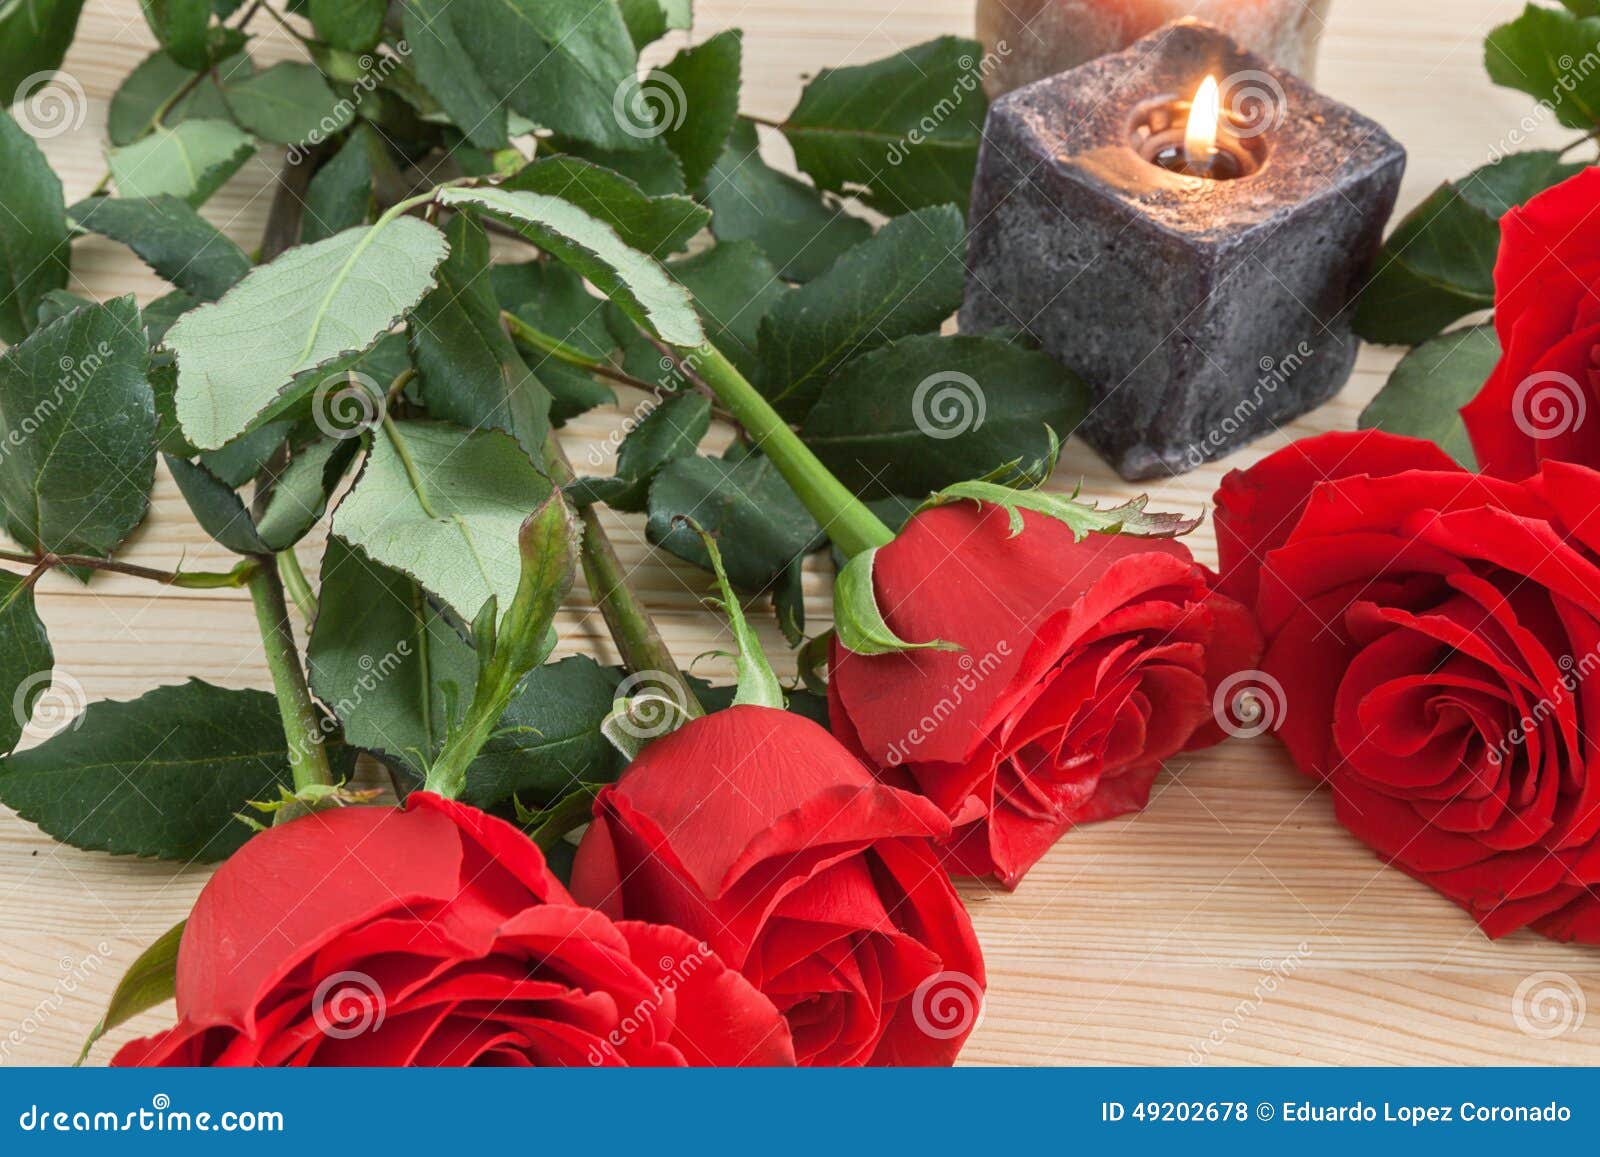 Red Roses for Valentine S Day Stock Photo - Image of fresh, white: 49202678